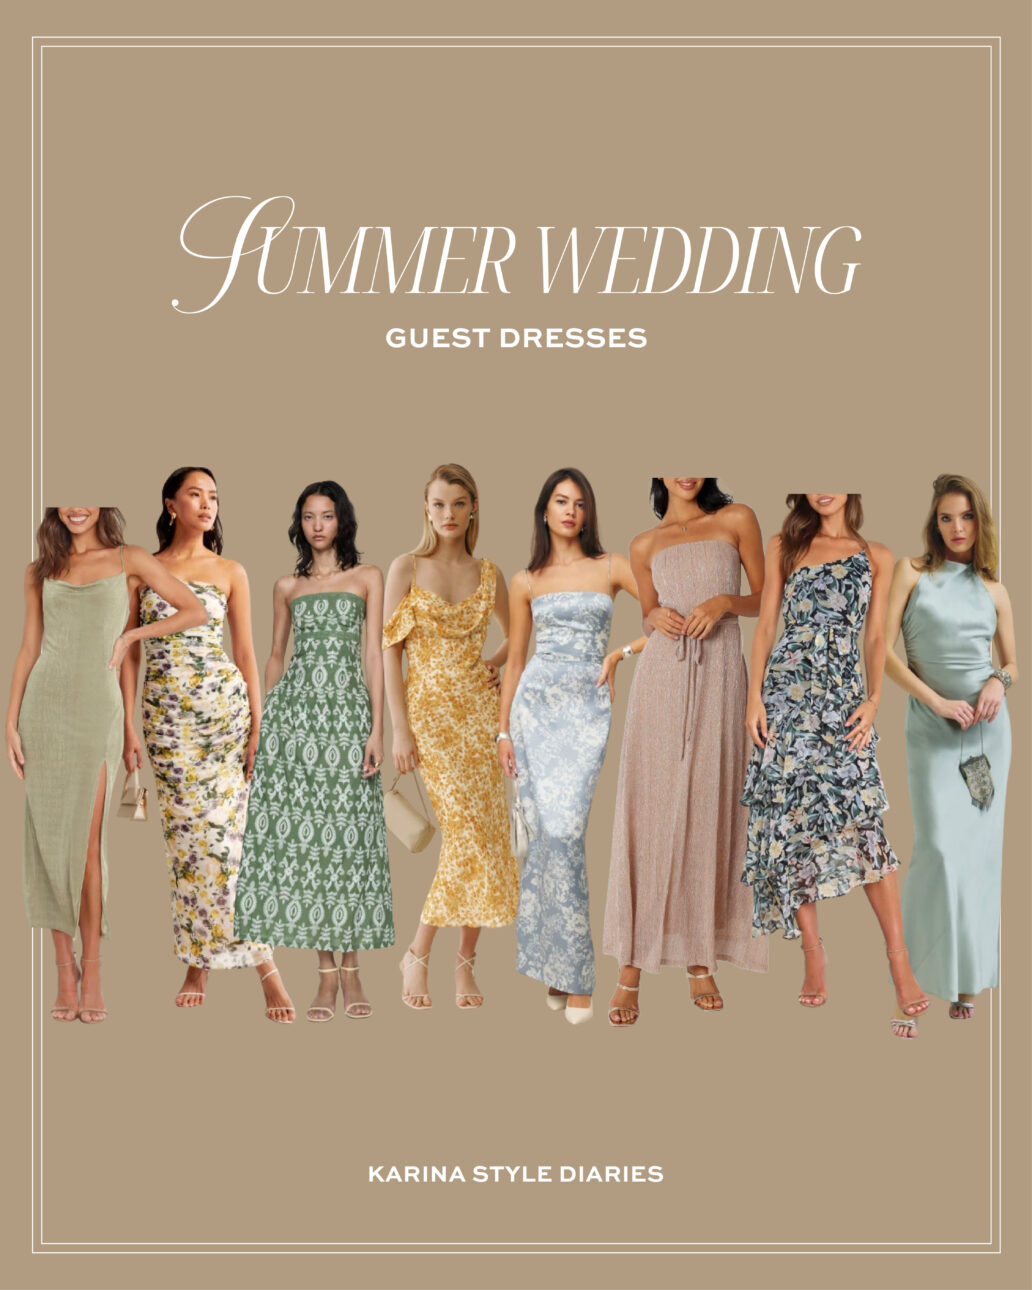 what to wear to a summer wedding